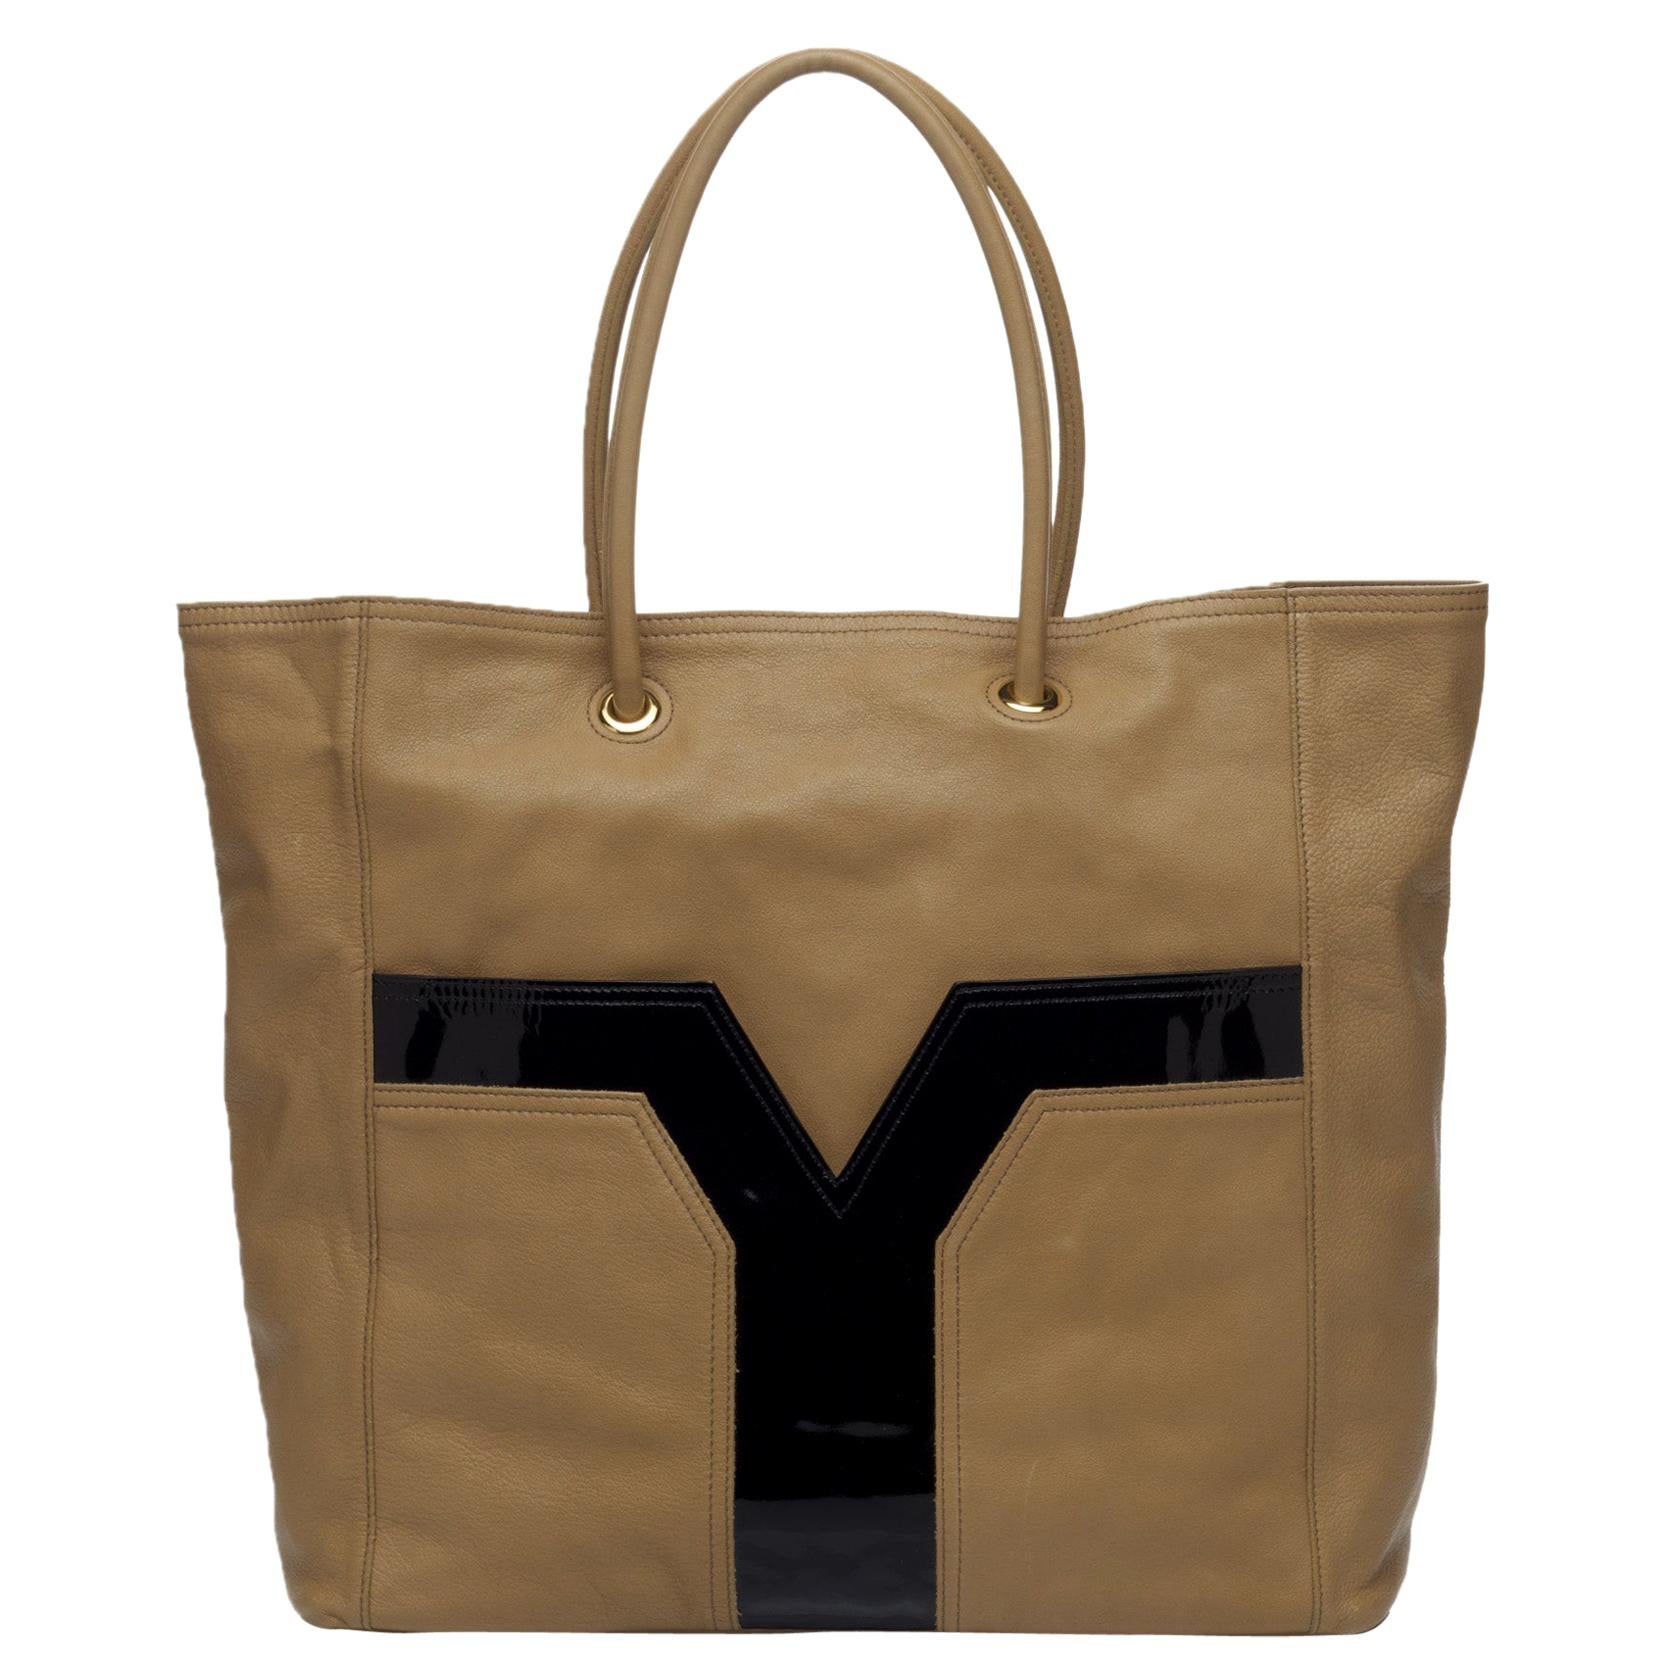 Vintage Authentic YSL Leather Lucky Chyc Tote w Dust Bag Authenticity Card  For Sale